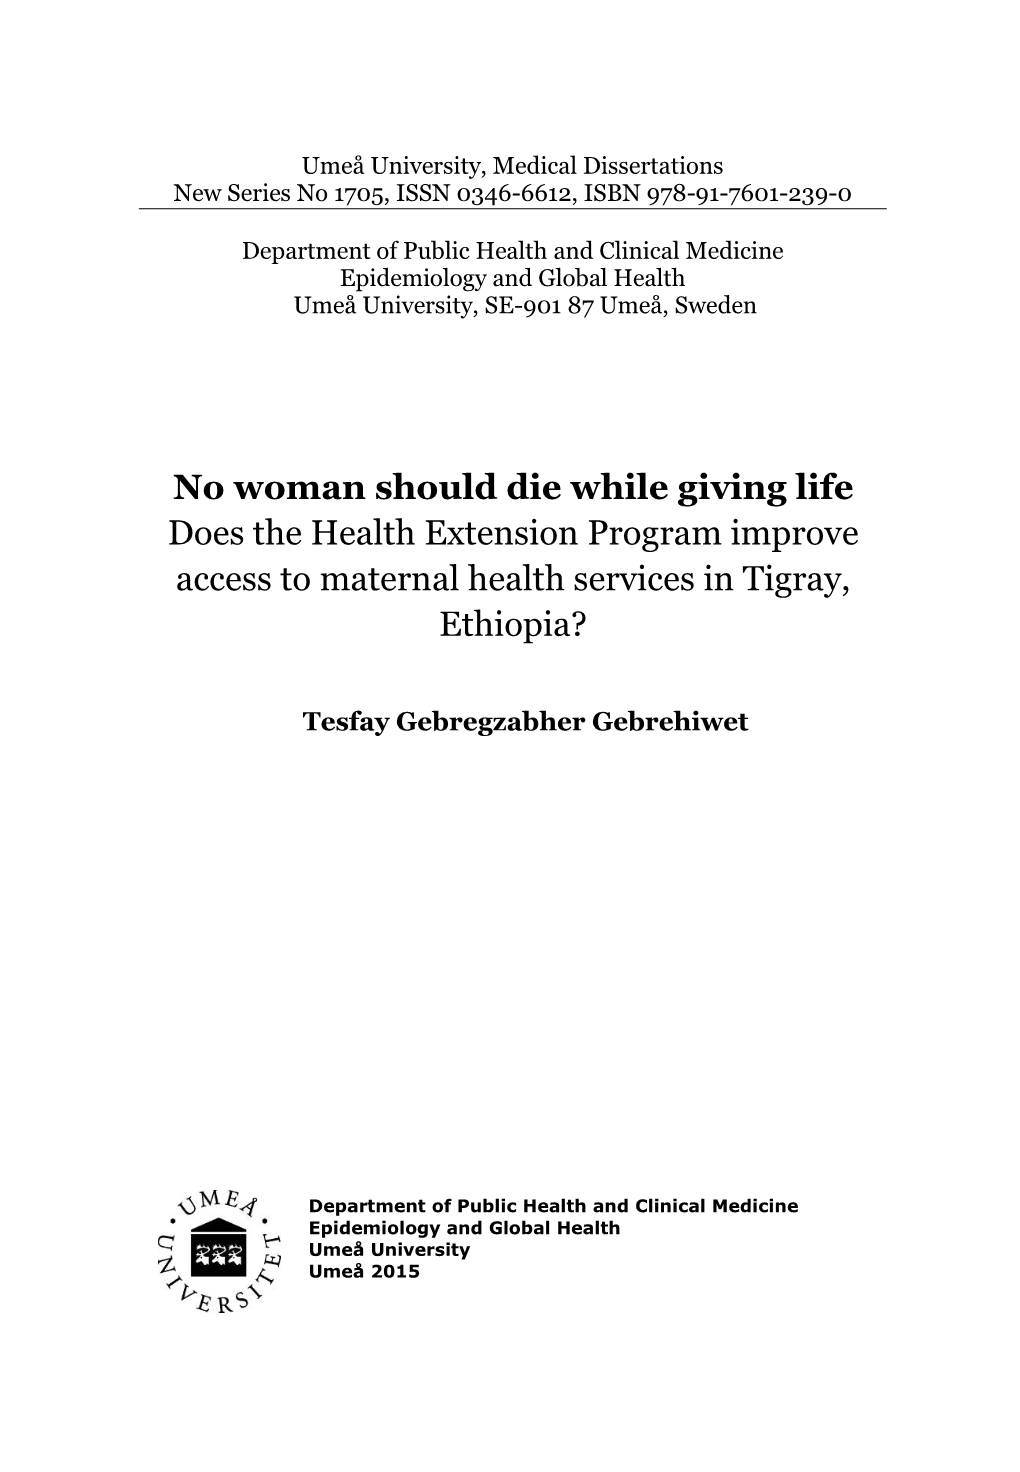 No Woman Should Die While Giving Life Does the Health Extension Program Improve Access to Maternal Health Services in Tigray, Ethiopia?